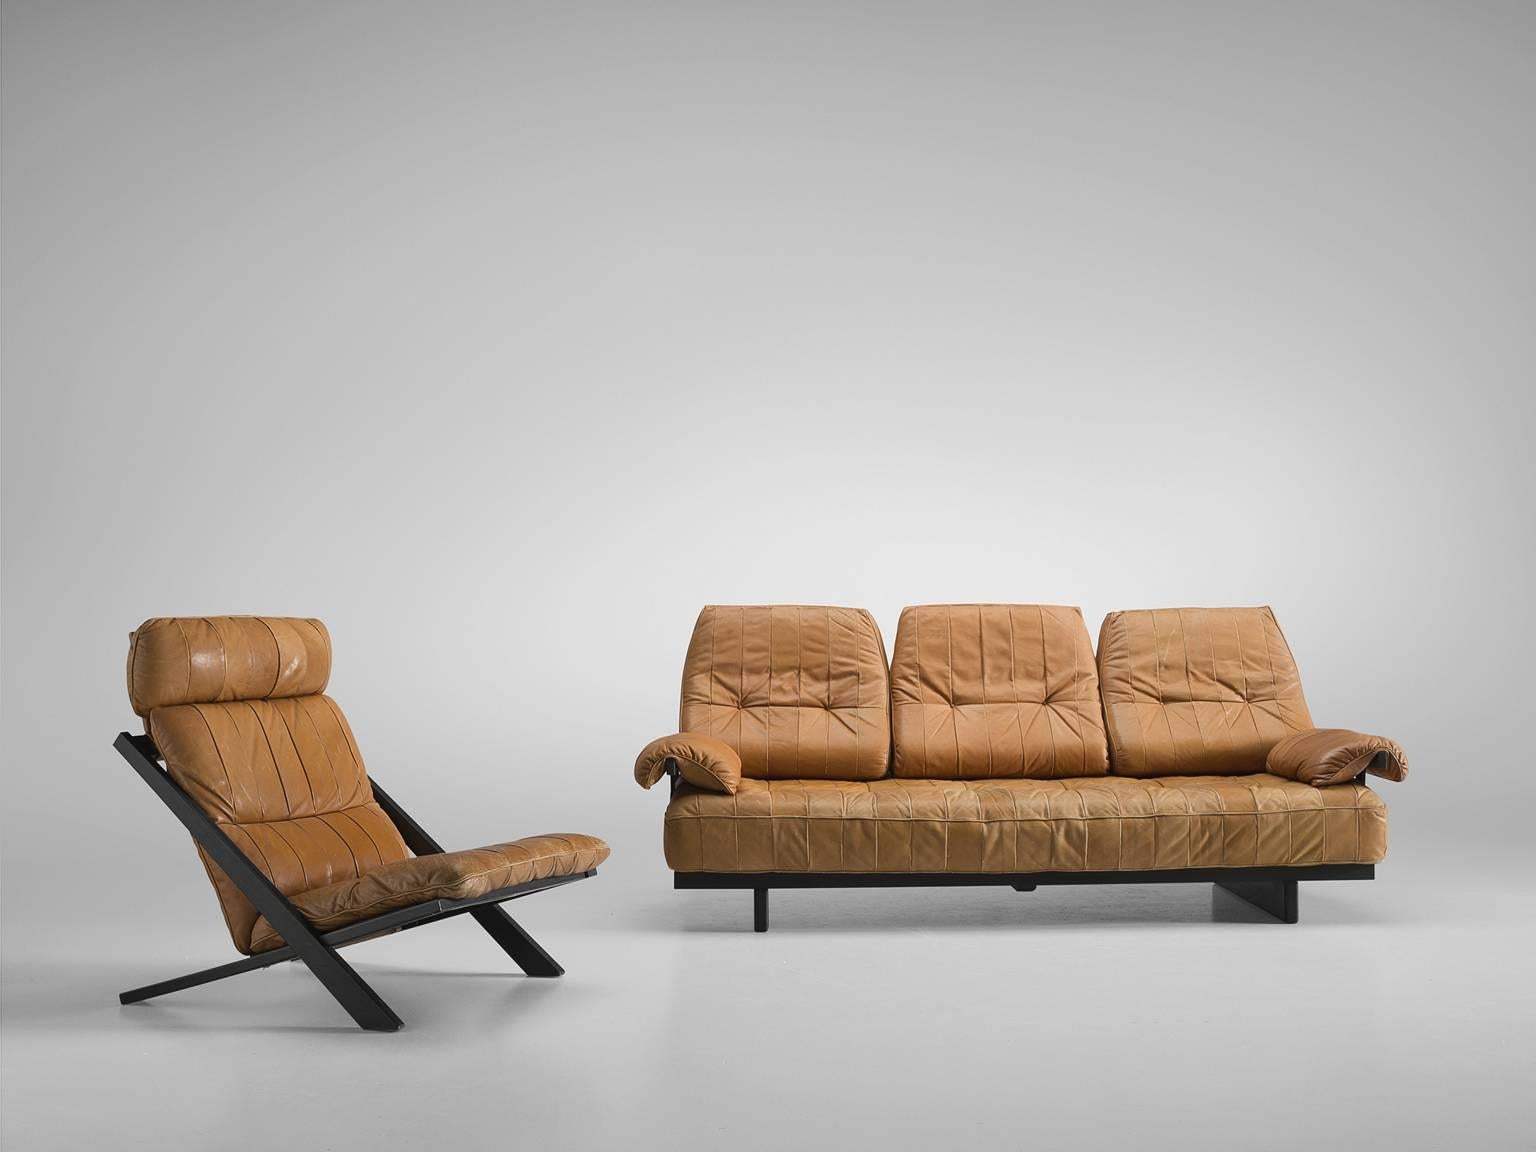 Post-Modern Ueli Berger Lounge Chair and DS 80 Sofa by De Sede